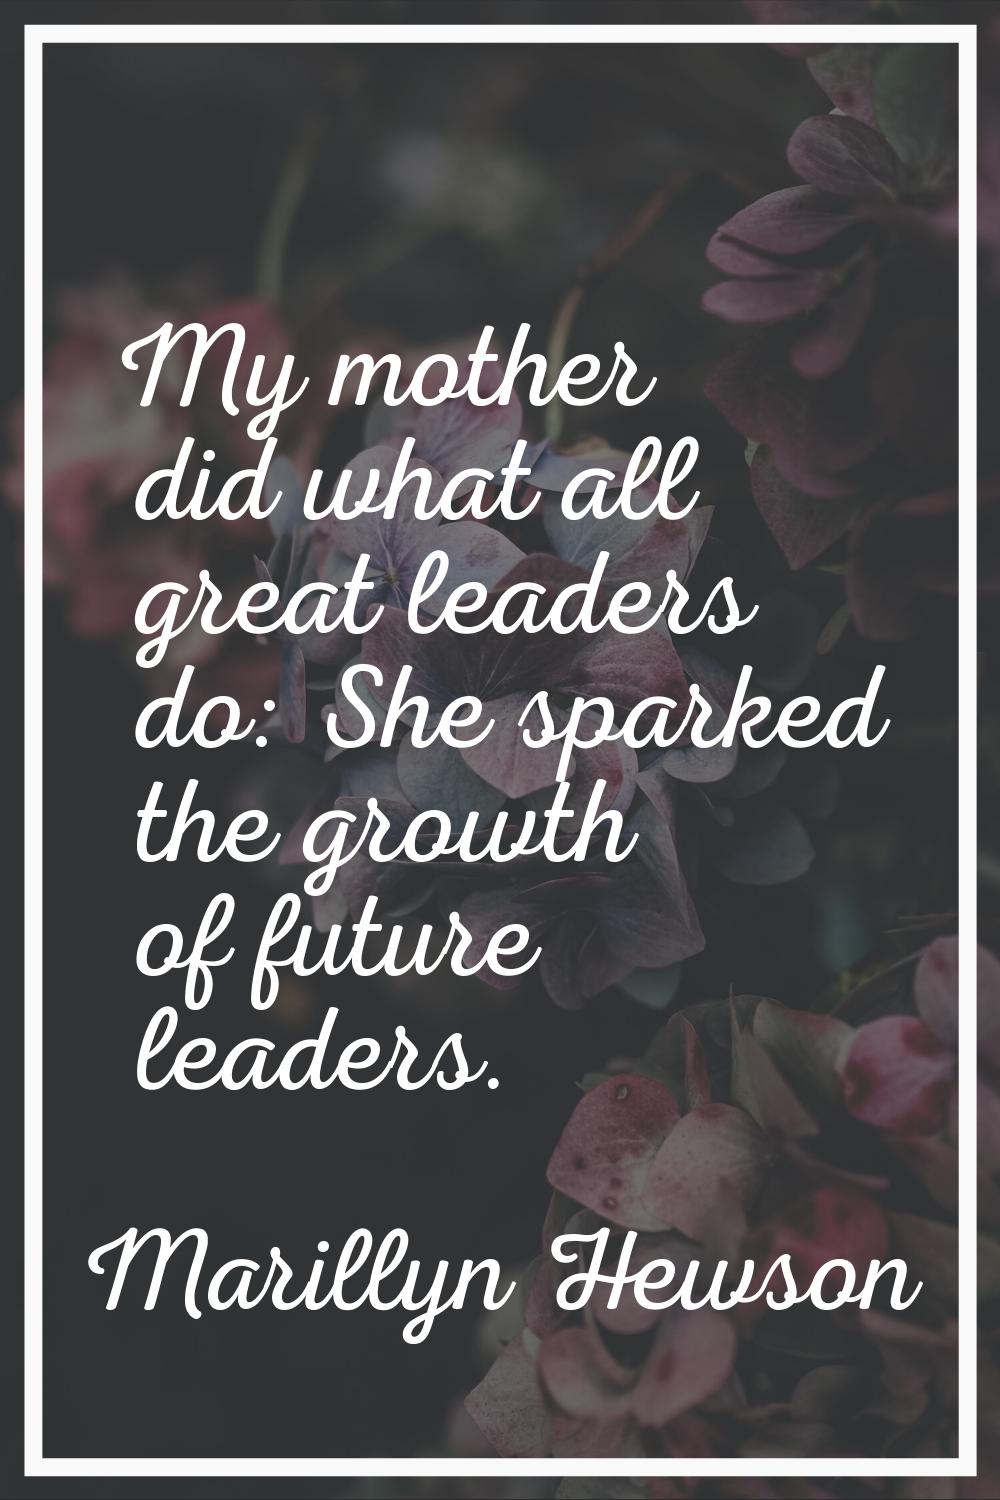 My mother did what all great leaders do: She sparked the growth of future leaders.